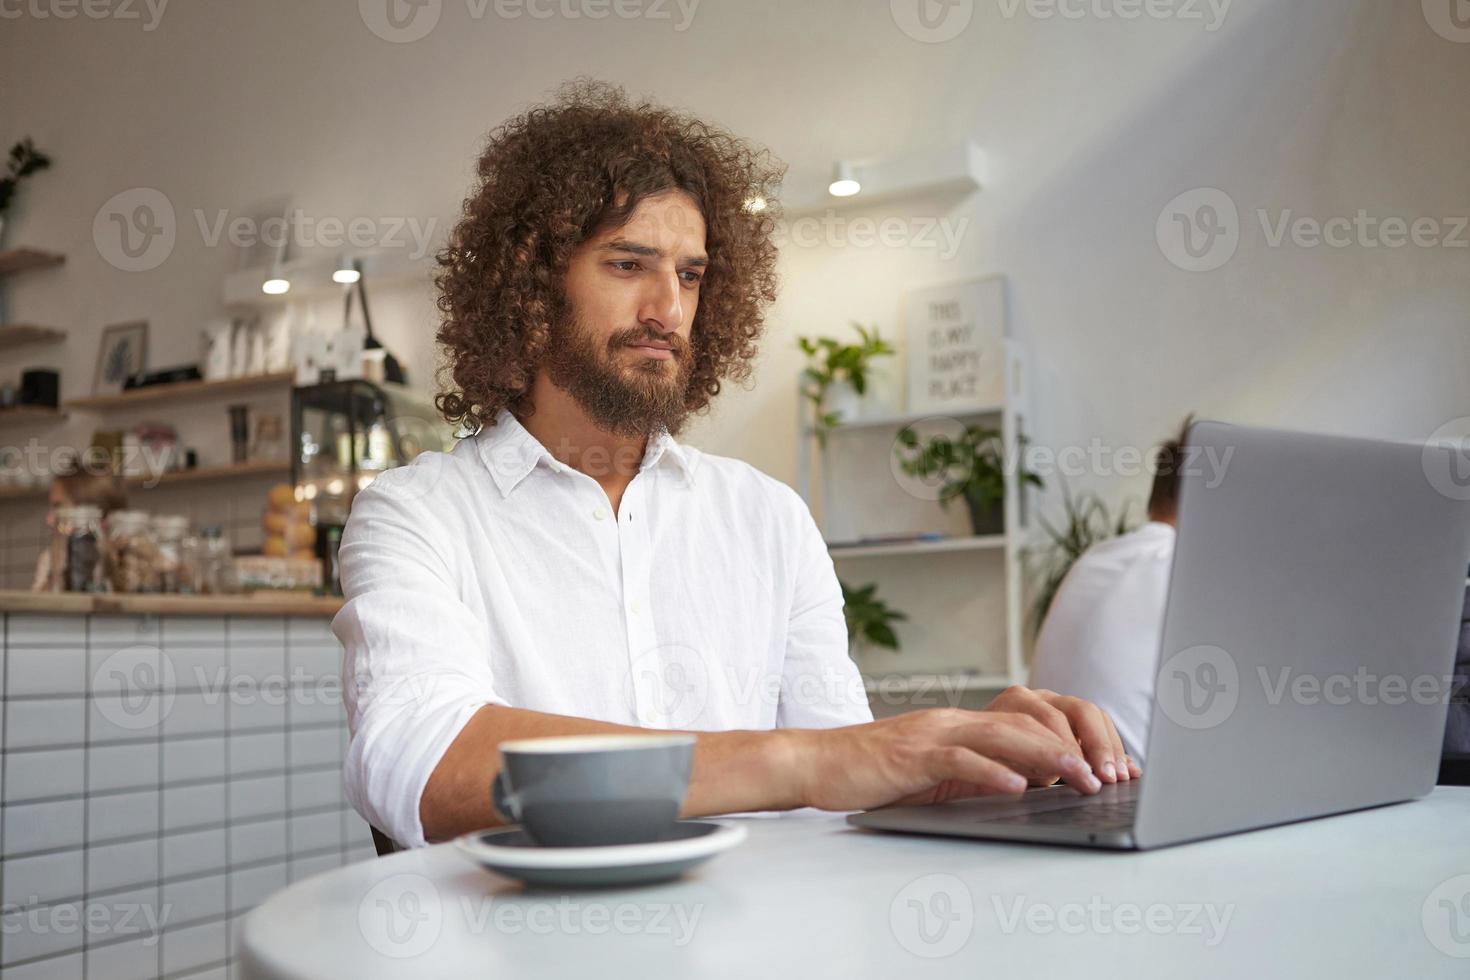 Indoor portrait of young serious businessman concentrating on work while sitting by desk in front of computer monitor, posing over cafe interior photo